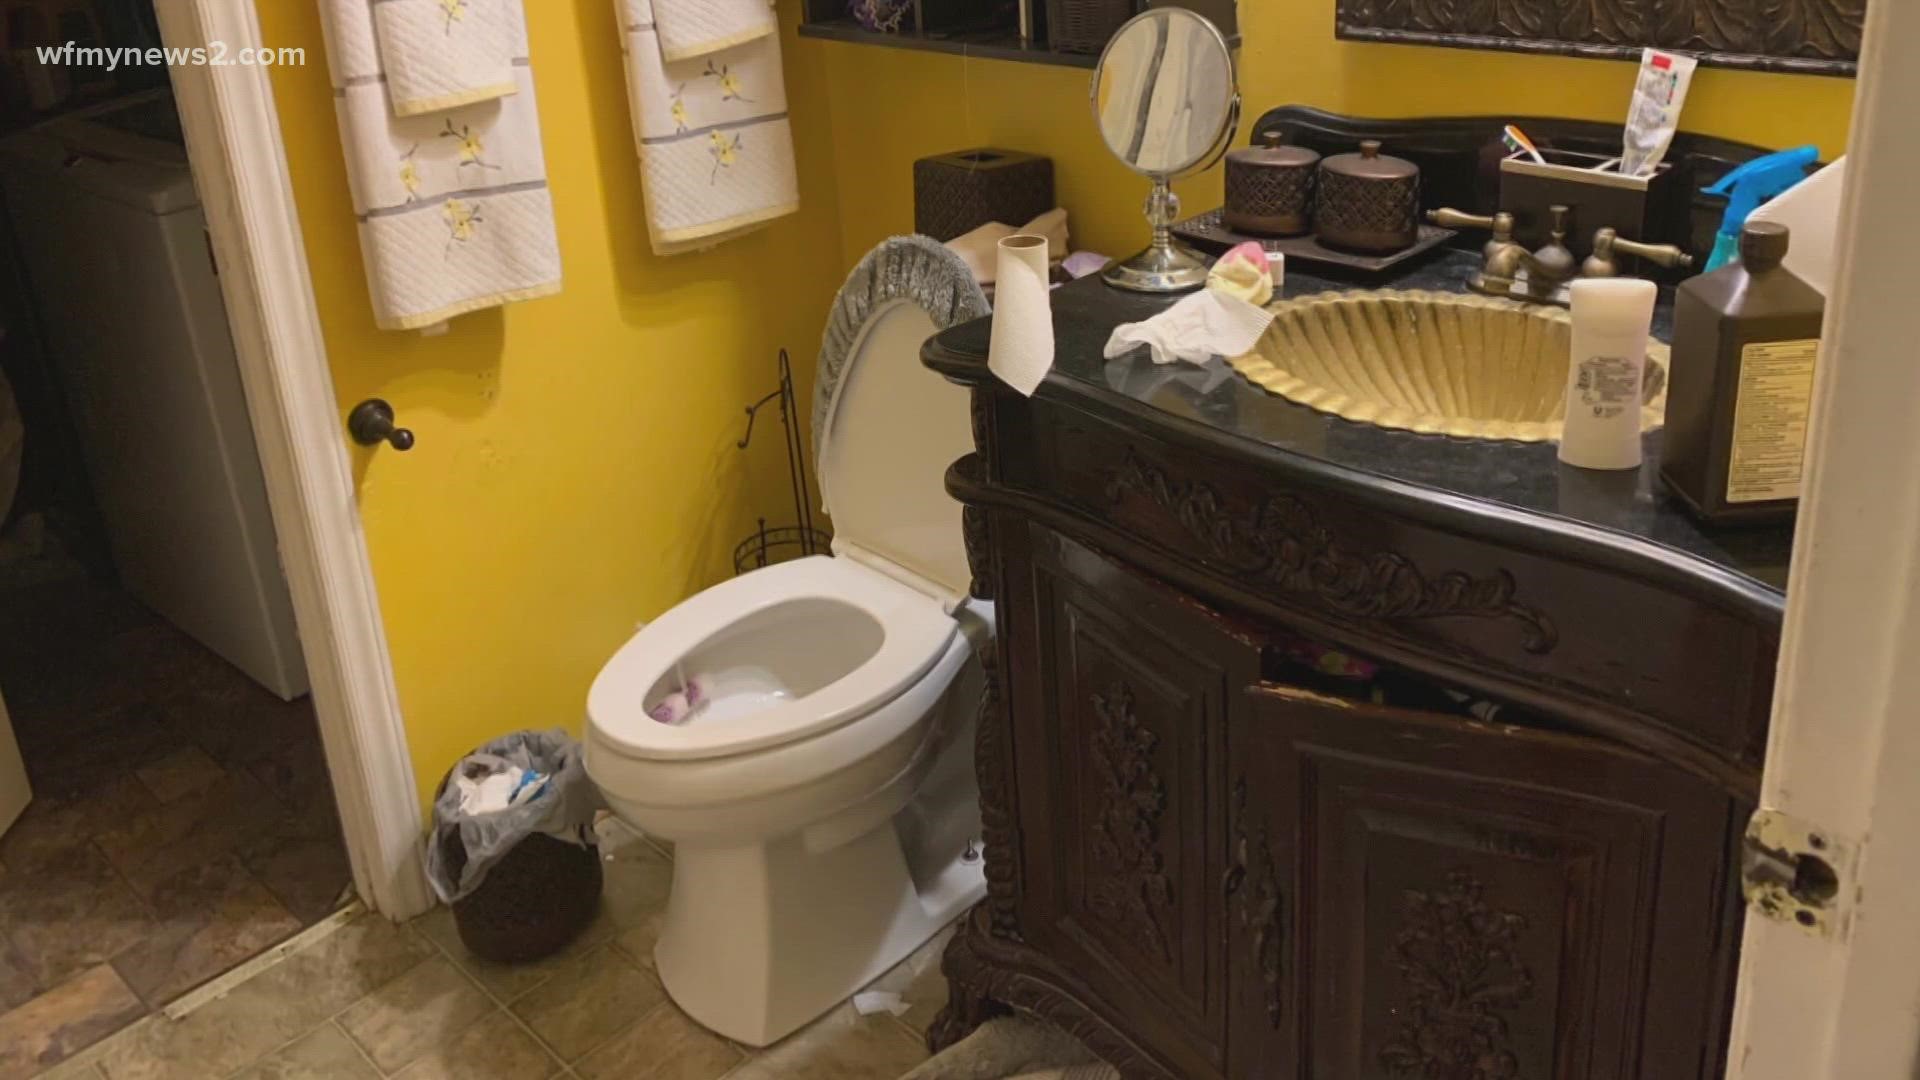 Getting her toilet repaired cost $3,500, but the plumber said the city was to blame for some of the problems.